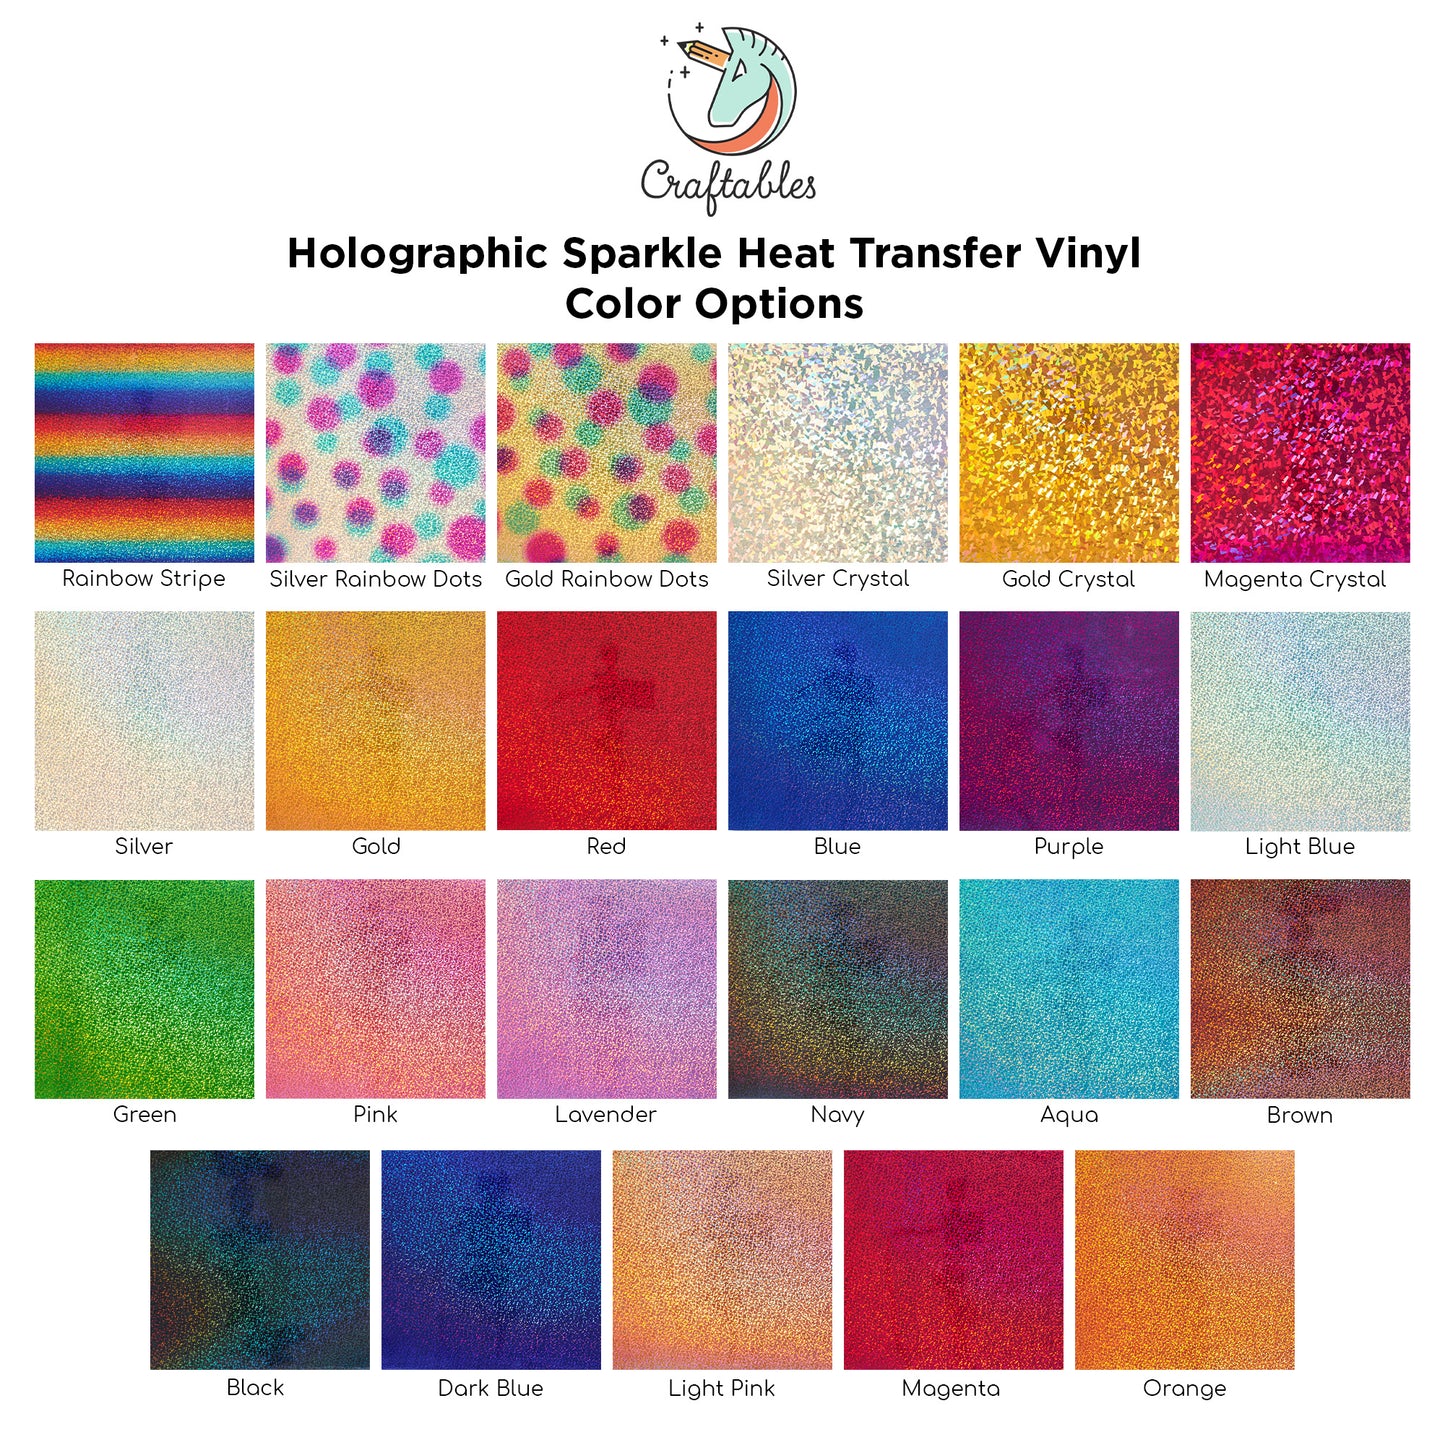 Brown Holographic Sparkle Heat Transfer Vinyl Sheets By Craftables